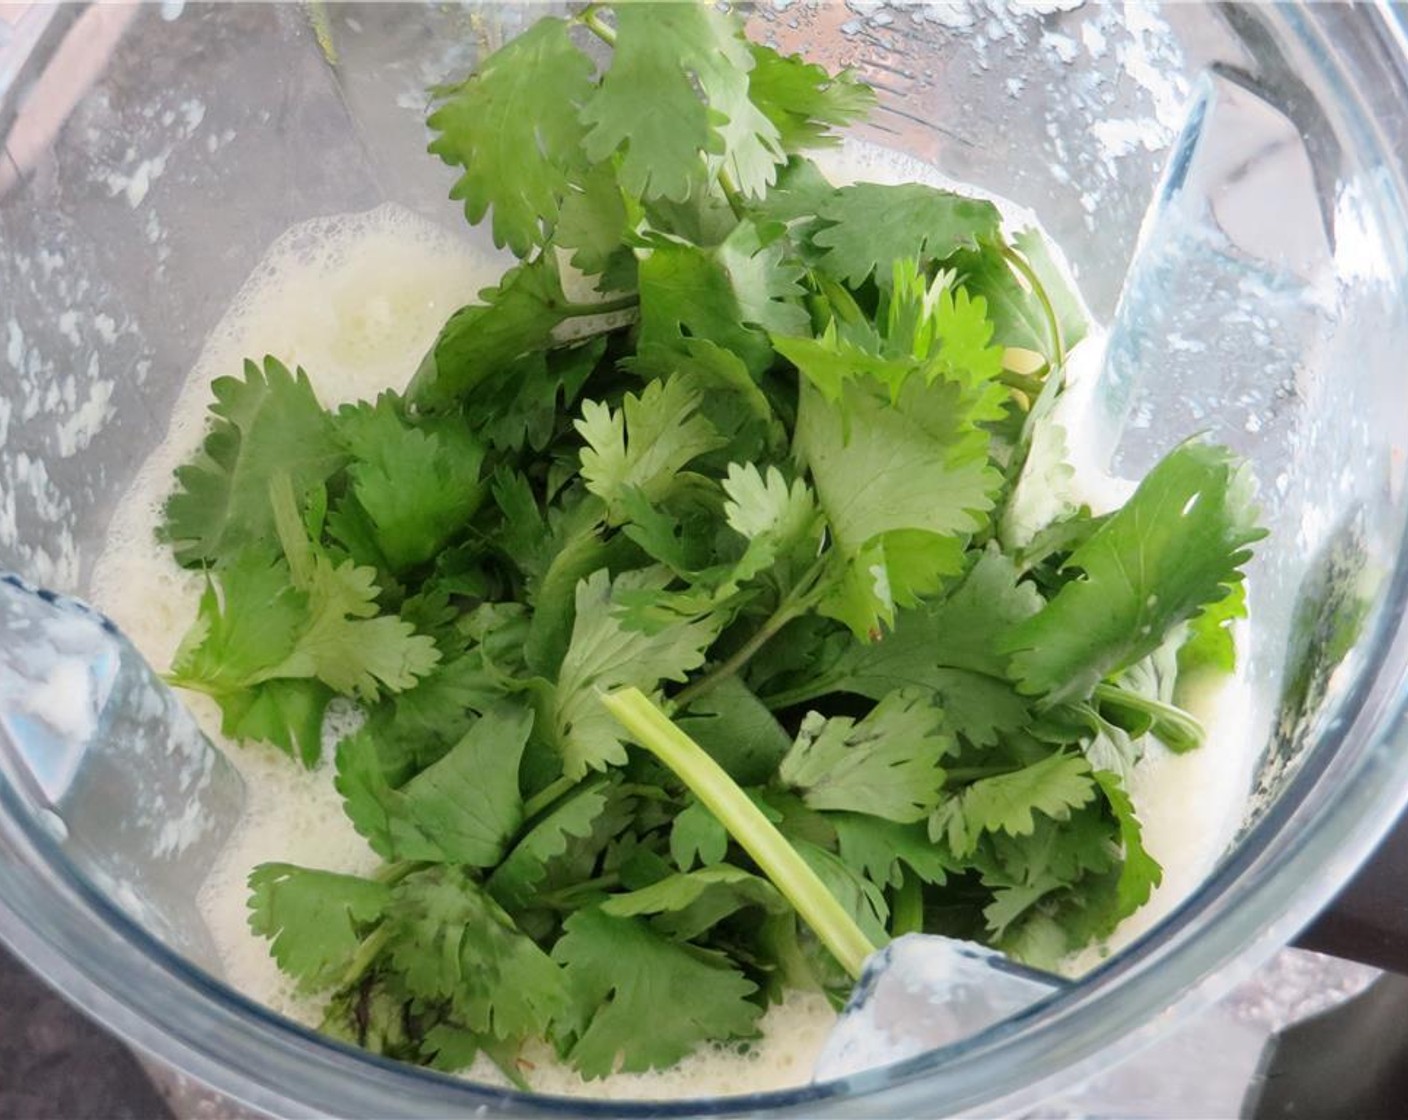 step 1 In a blender, combine the English Cucumbers (2), Fresh Cilantro (1/2 cup), Silken Tofu (8 oz), Vegetable Broth (6 fl oz), Garlic (1 clove), White Wine Vinegar (1/2 Tbsp) and Kosher Salt (1 tsp). Puree until smooth. Refrigerate at least two hours to chill before serving. Season to taste.